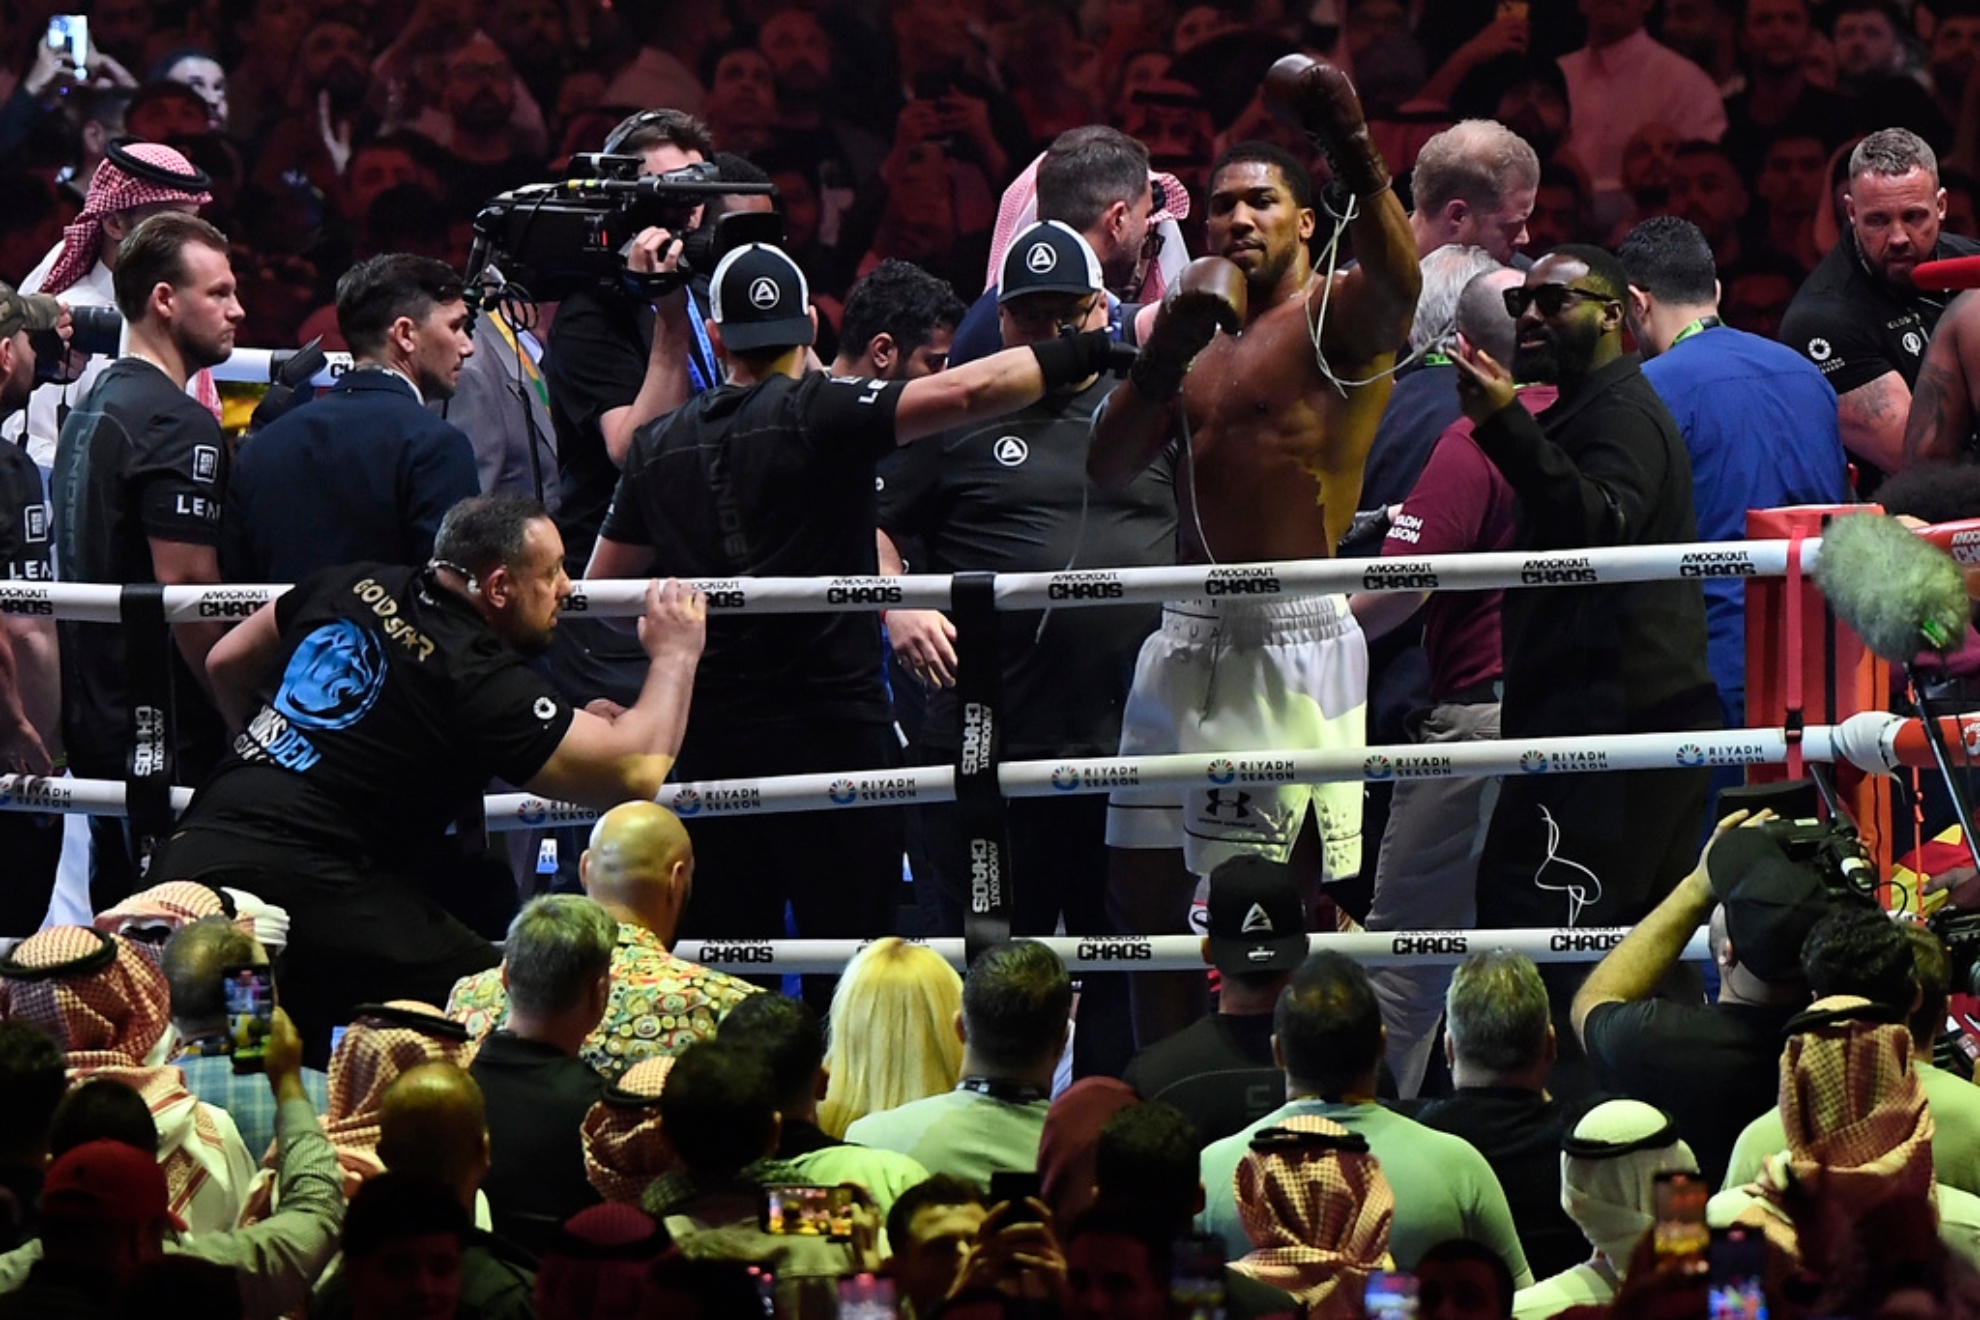 Anthony Joshua responds nonchalantly about which boxers he wants to fight next